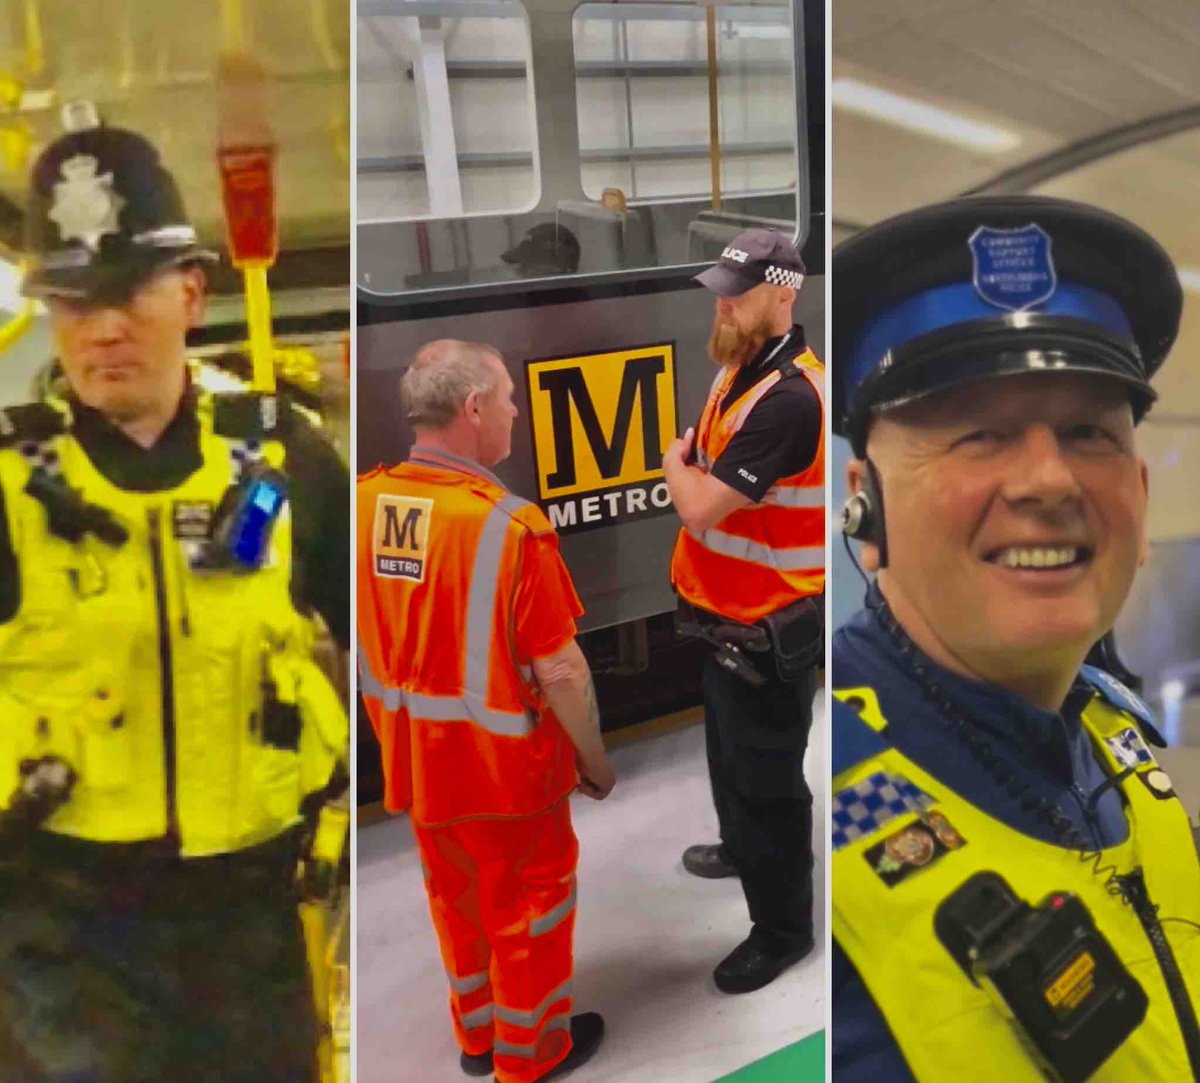 #MetroNPT Every day we work closely with our partners at @My_Metro Targeting jointly identified issues such as trespass, disorder or theft/damage to #Metro infrastructure. #NorthumbriaPolice #Nexus #NorthTyneside #Newcastle #Gateshead #SouthTyneside #TransportNorthEast #Nexus